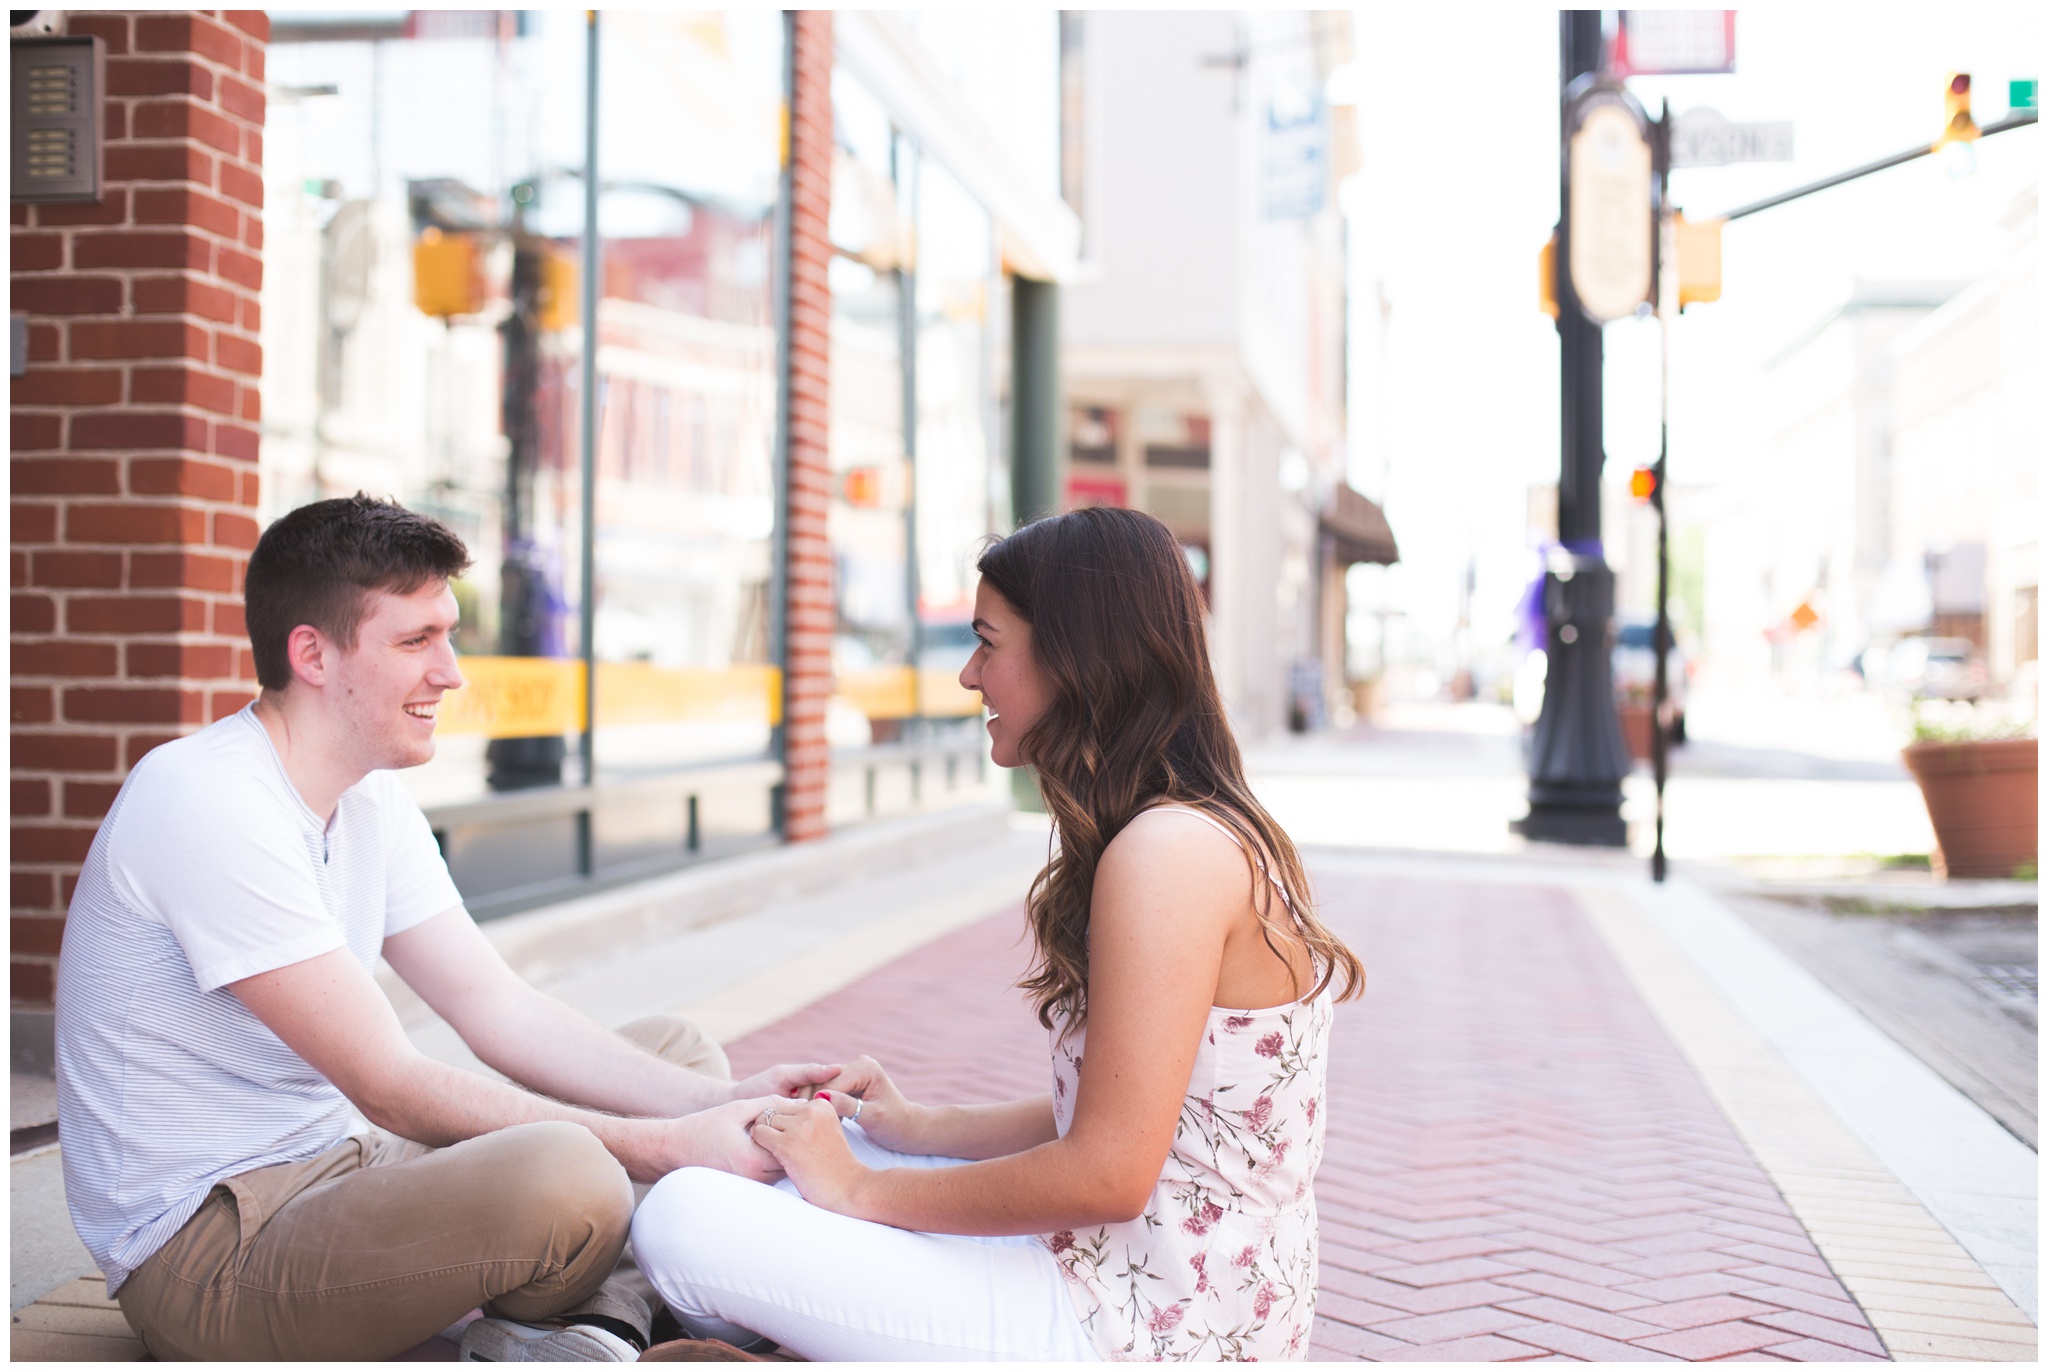 downtown Muncie Indiana engagement session